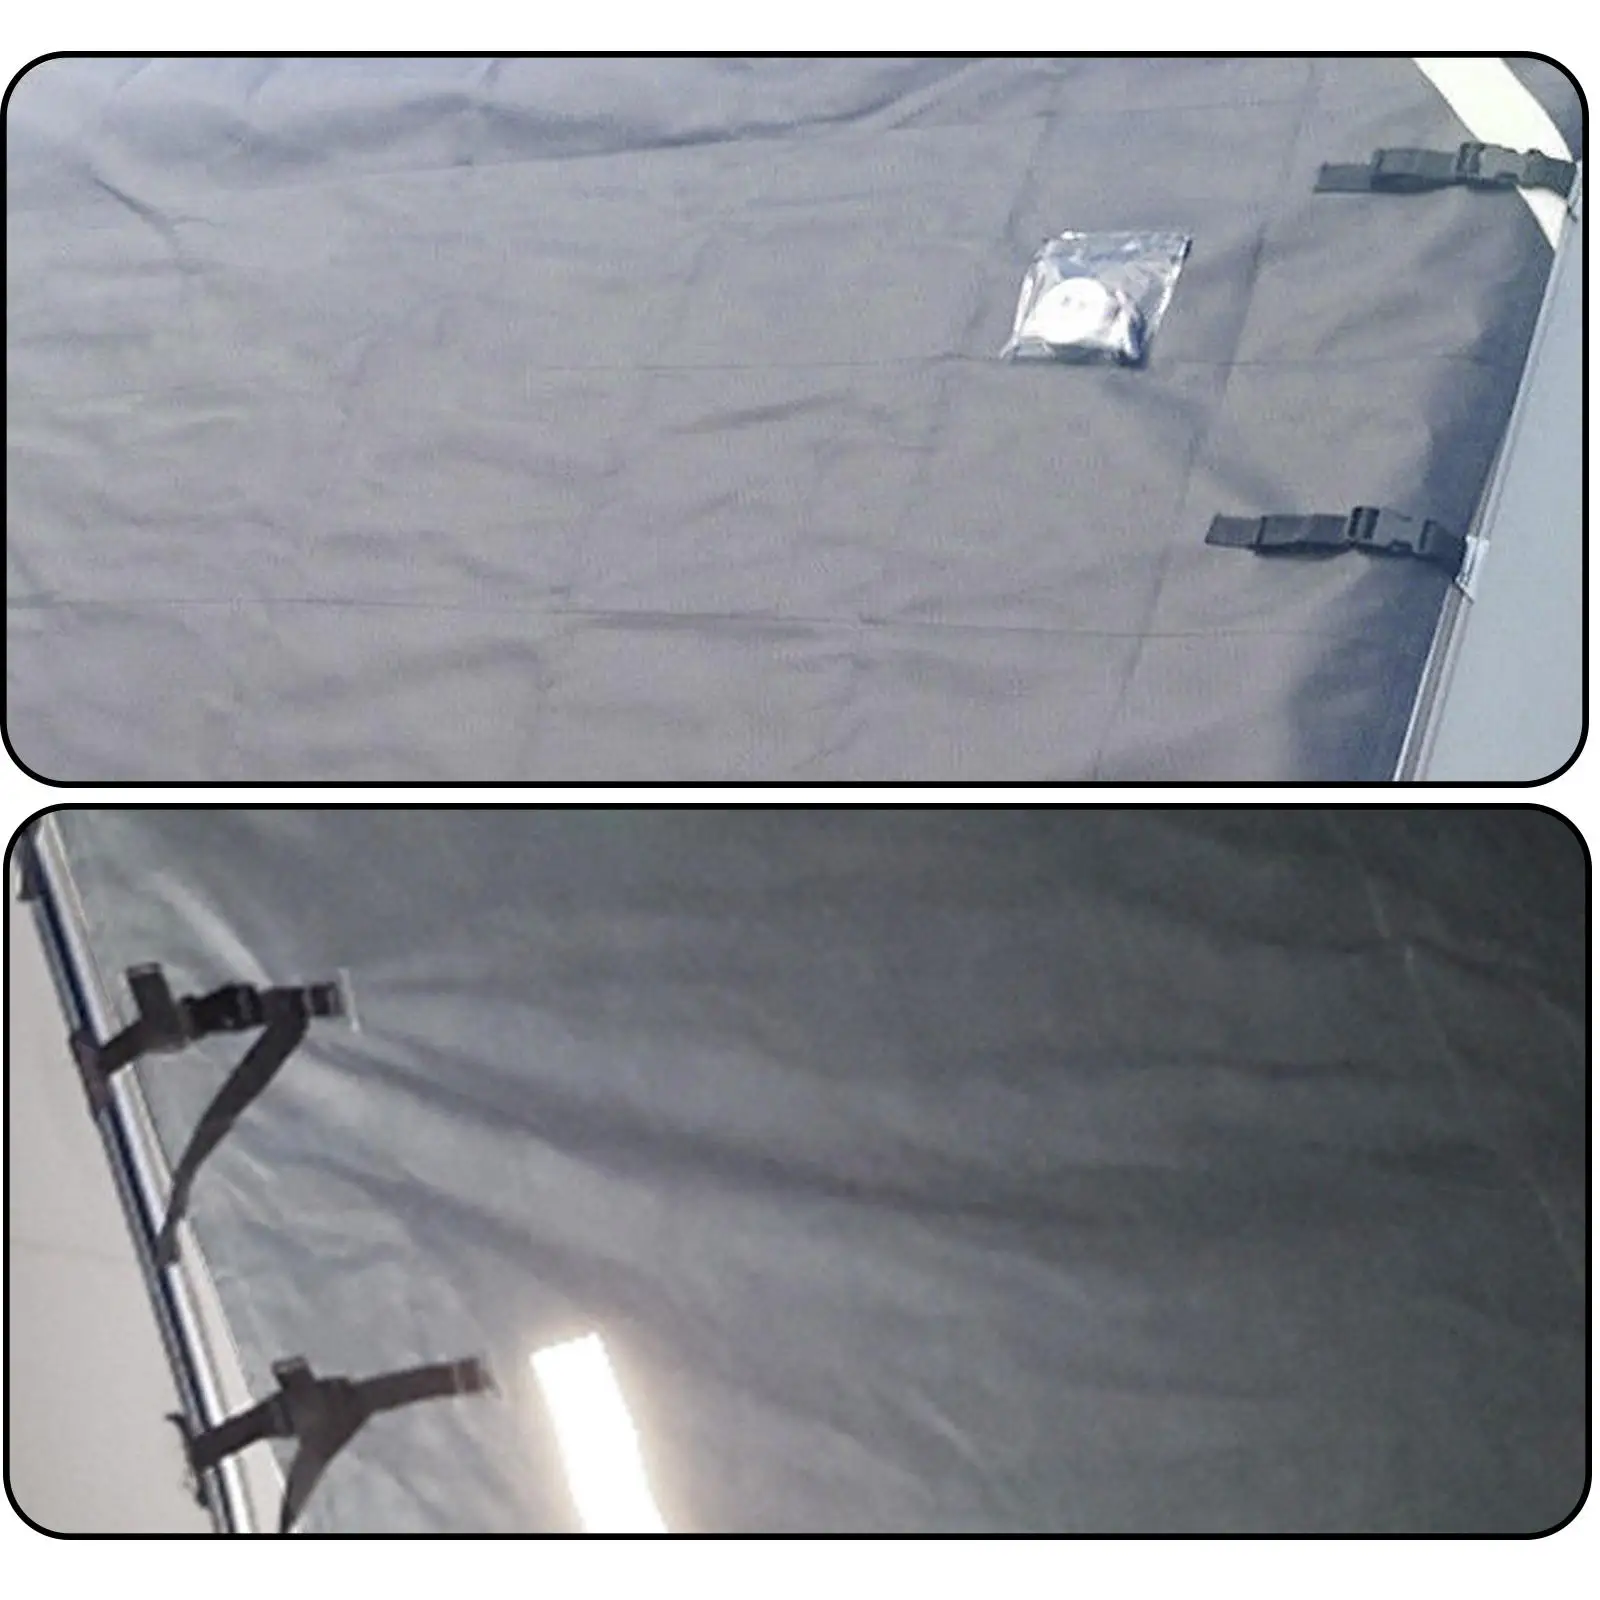 RV Front Towing Cover 4Ply Breathable Oxford Cloth Universal Waterproof Protector with 2 LED Lights Caravan Towing Cover